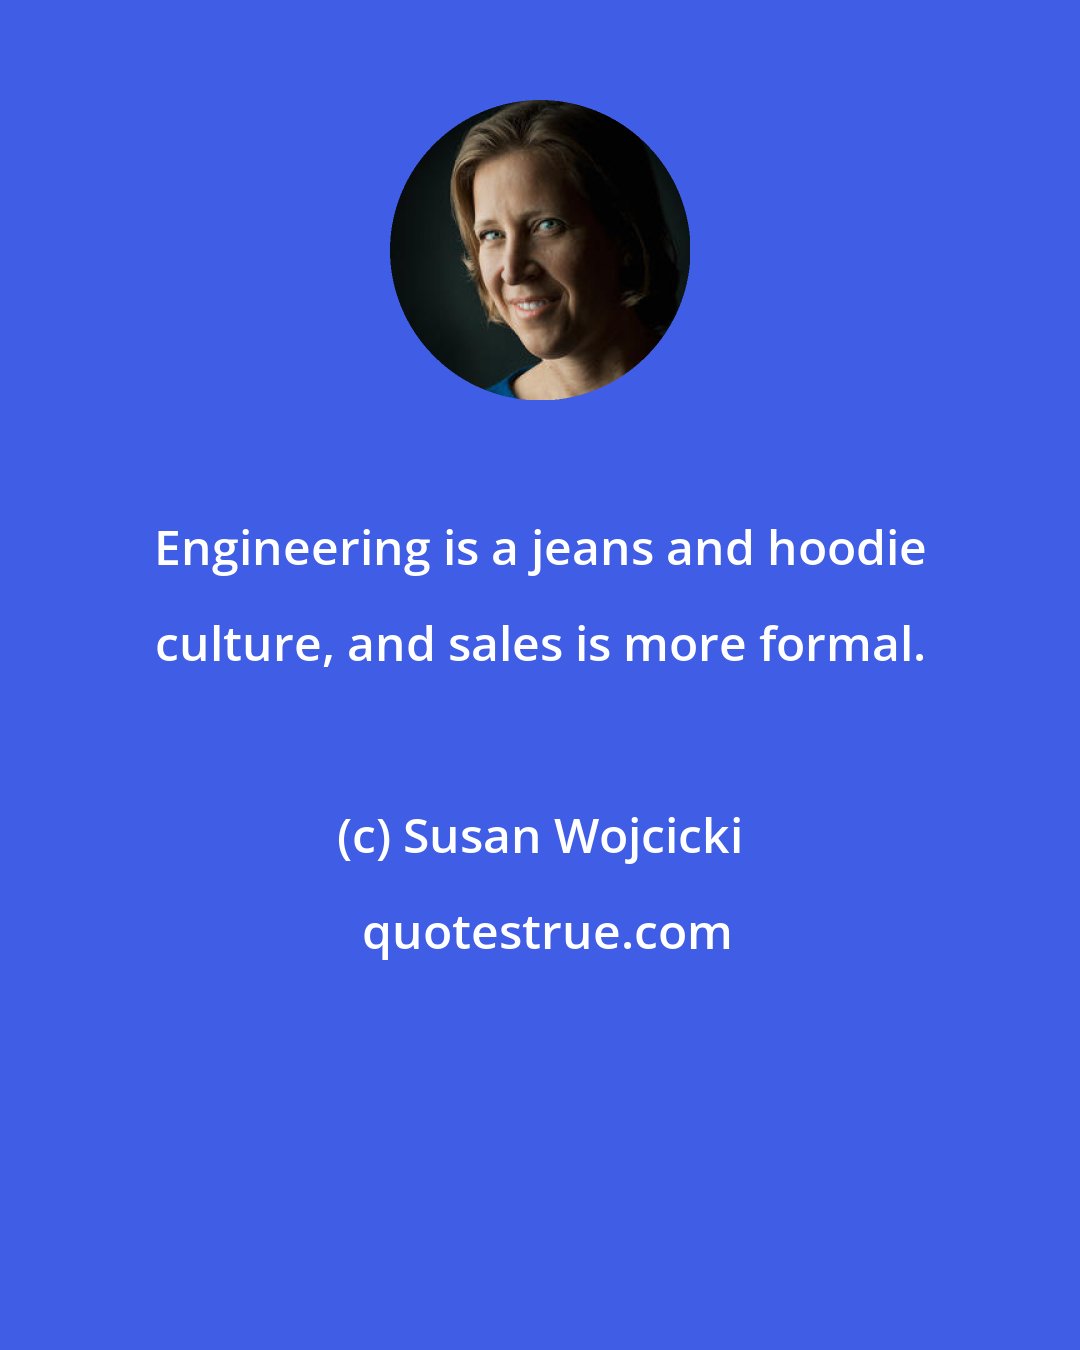 Susan Wojcicki: Engineering is a jeans and hoodie culture, and sales is more formal.